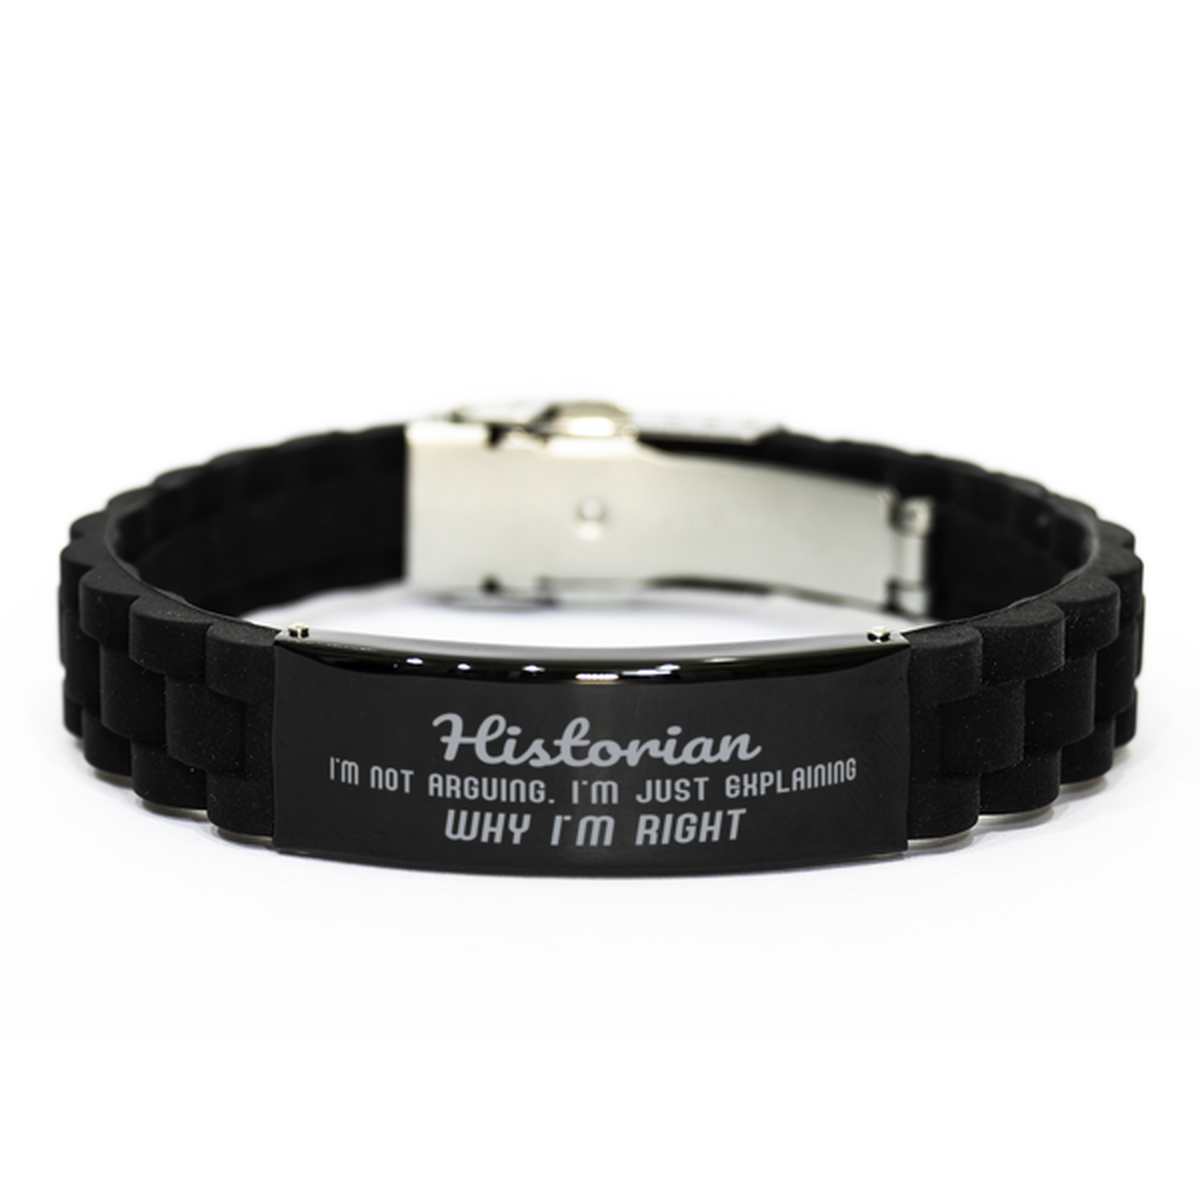 Historian I'm not Arguing. I'm Just Explaining Why I'm RIGHT Black Glidelock Clasp Bracelet, Funny Saying Quote Historian Gifts For Historian Graduation Birthday Christmas Gifts for Men Women Coworker